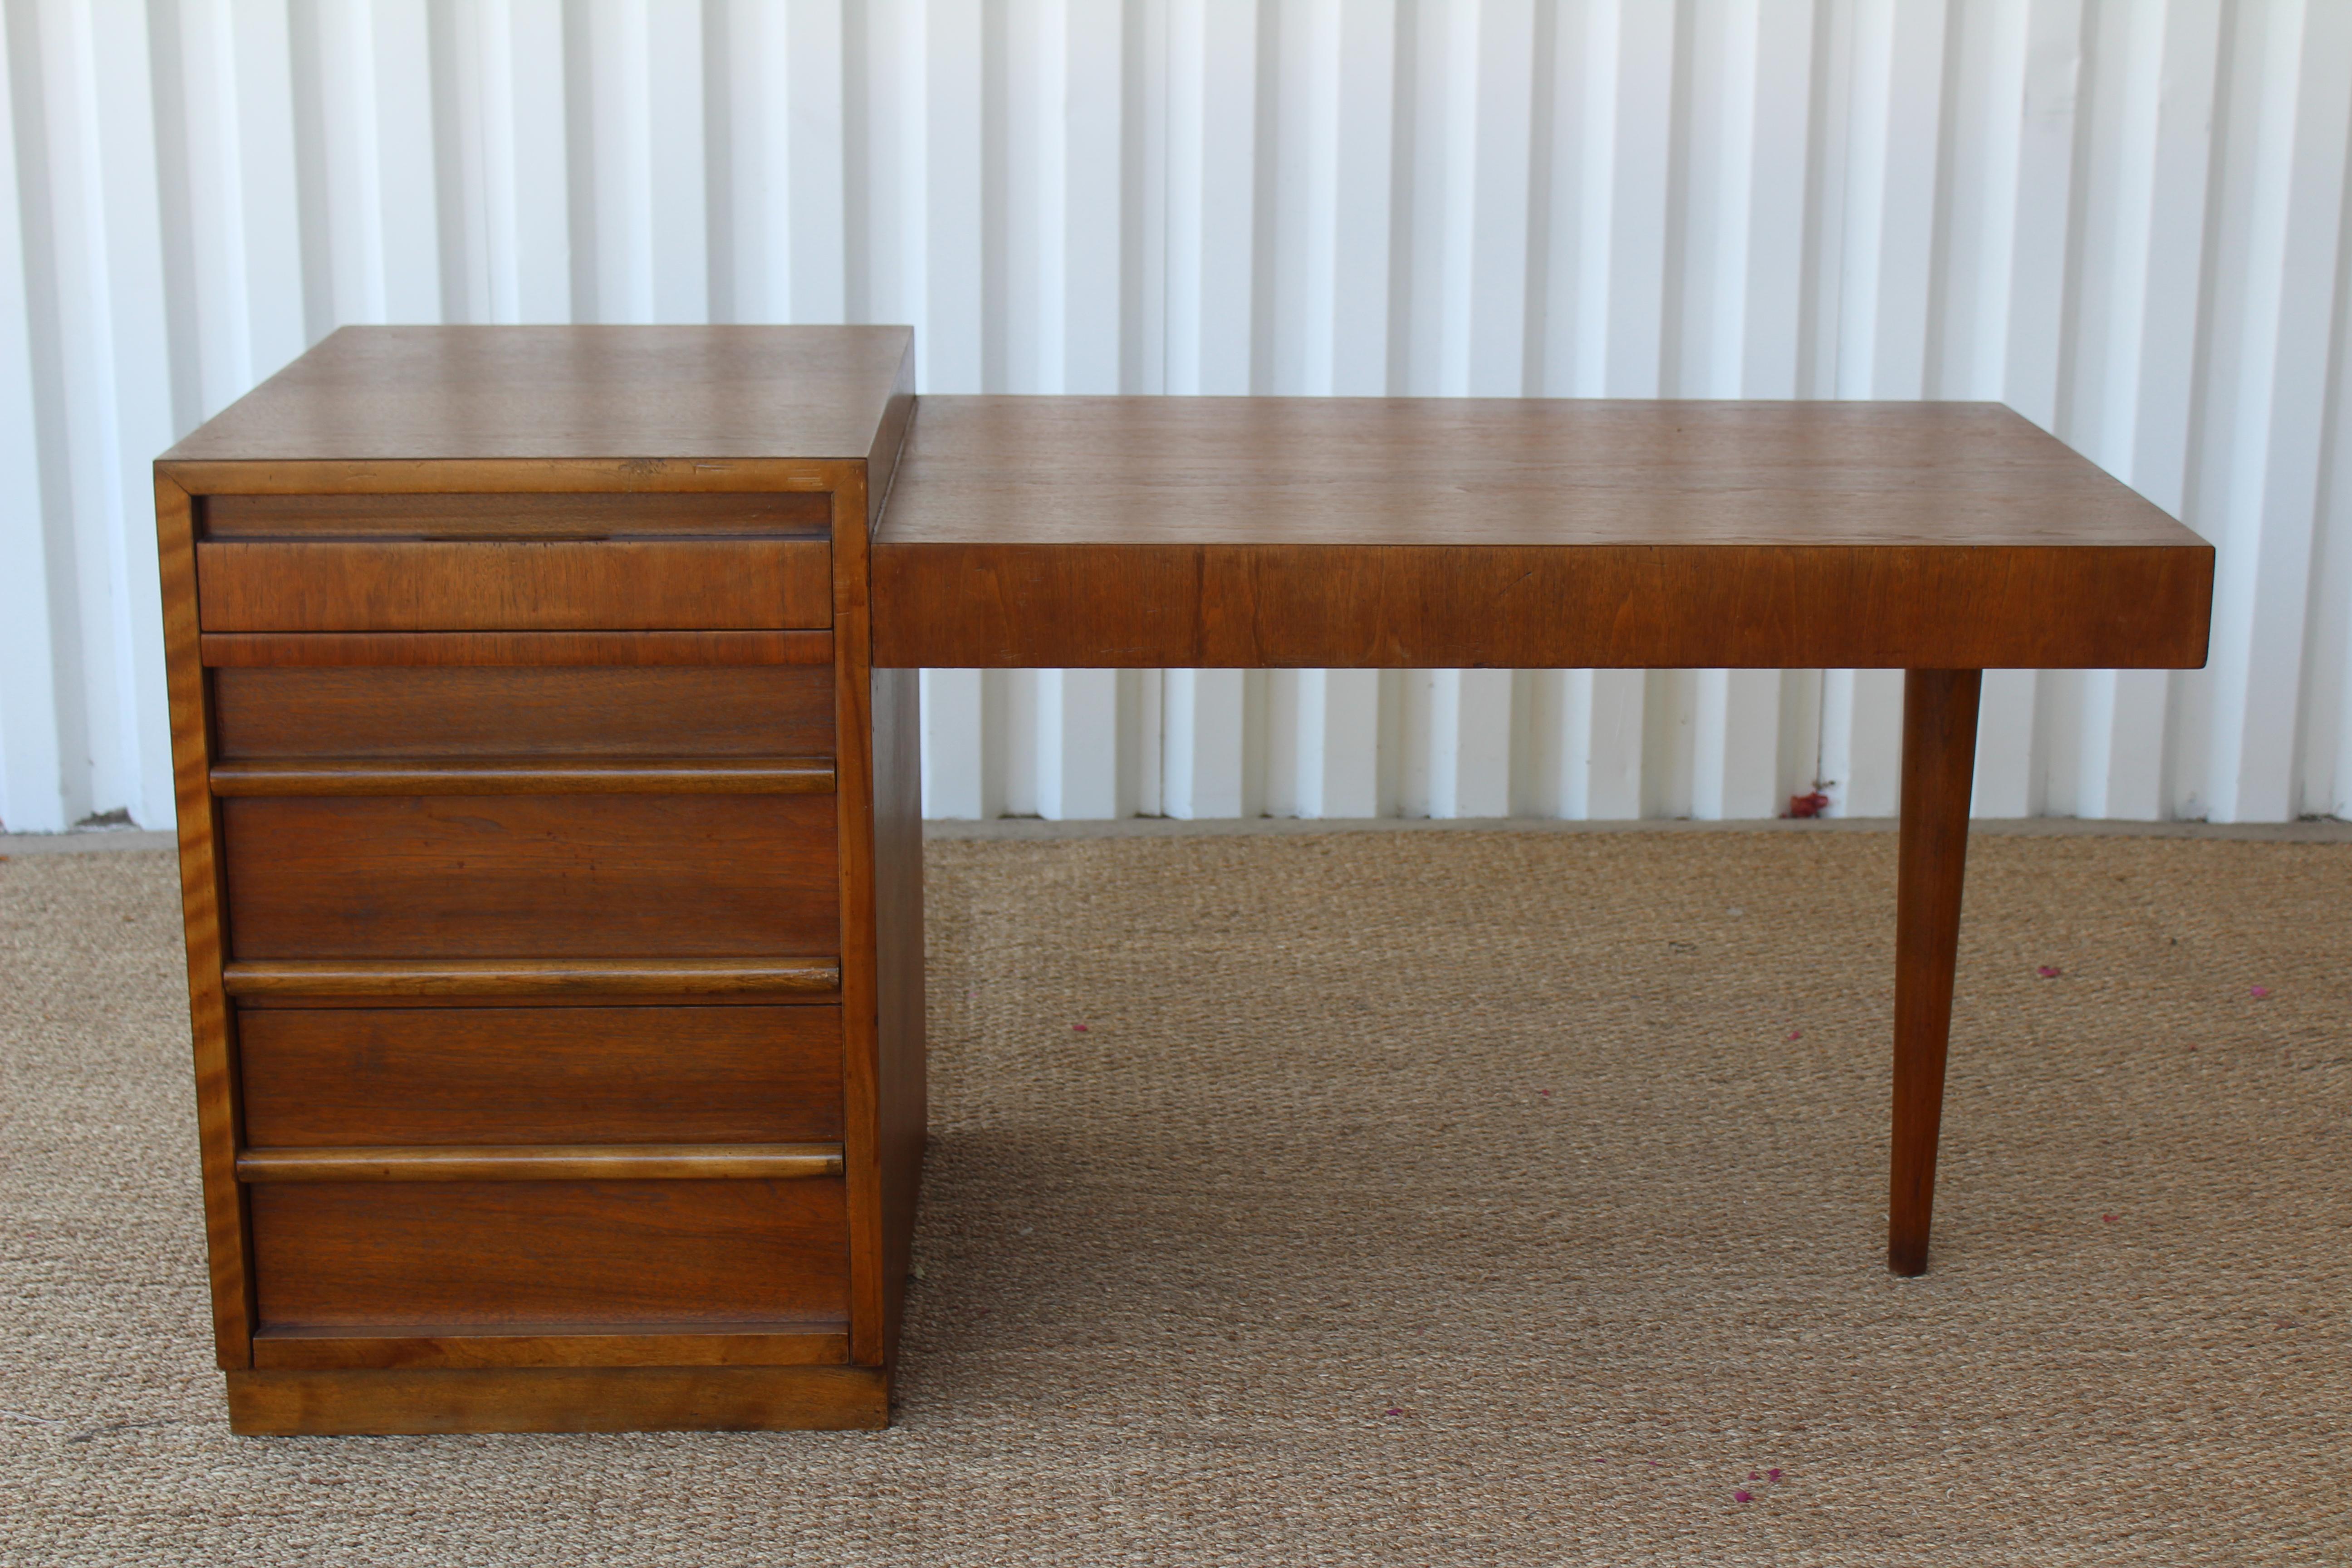 Mid-Century Modern walnut desk designed by Robsjohn Gibbings for Widdicomb, U.S.A, 1950s. Features 4 drawers and a pullout / pull-out board for extra workspace. The drawers feature oak interior dividers for filing paper and storing accessories. This